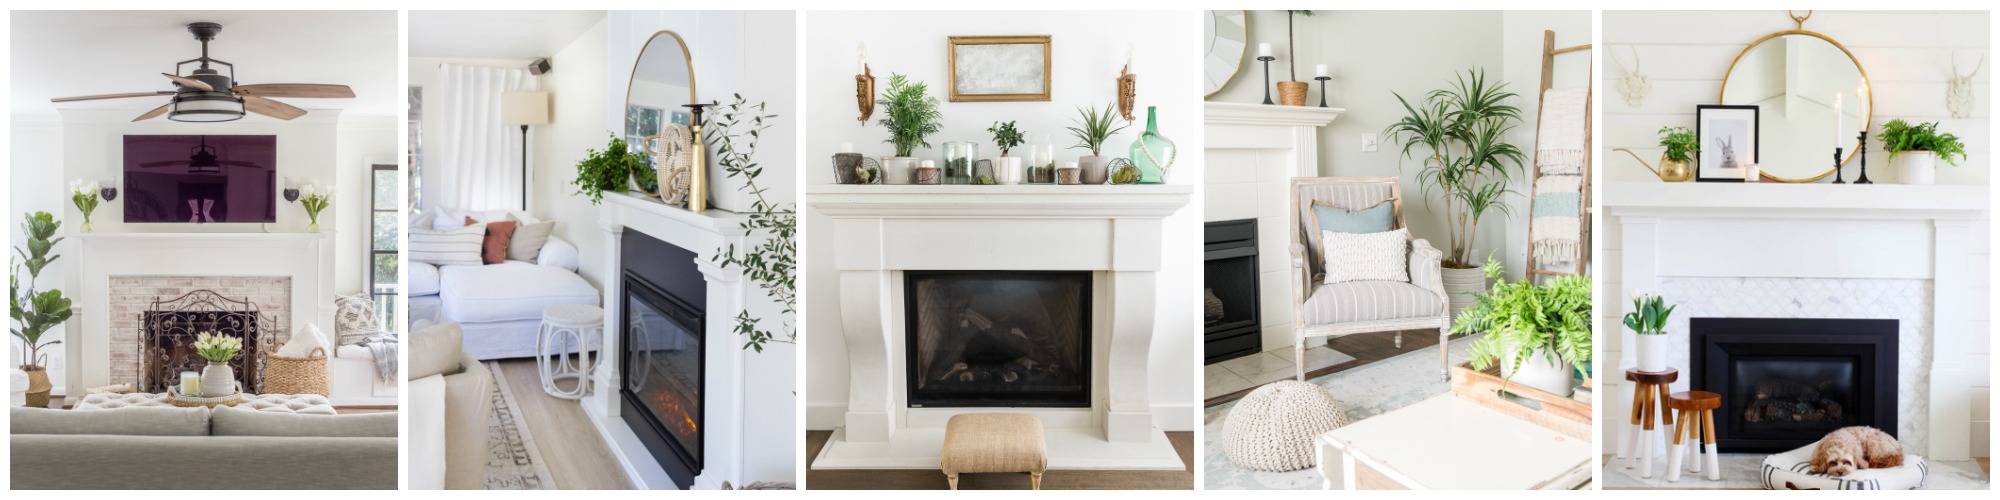 Fireplace mantels decorated for spring.